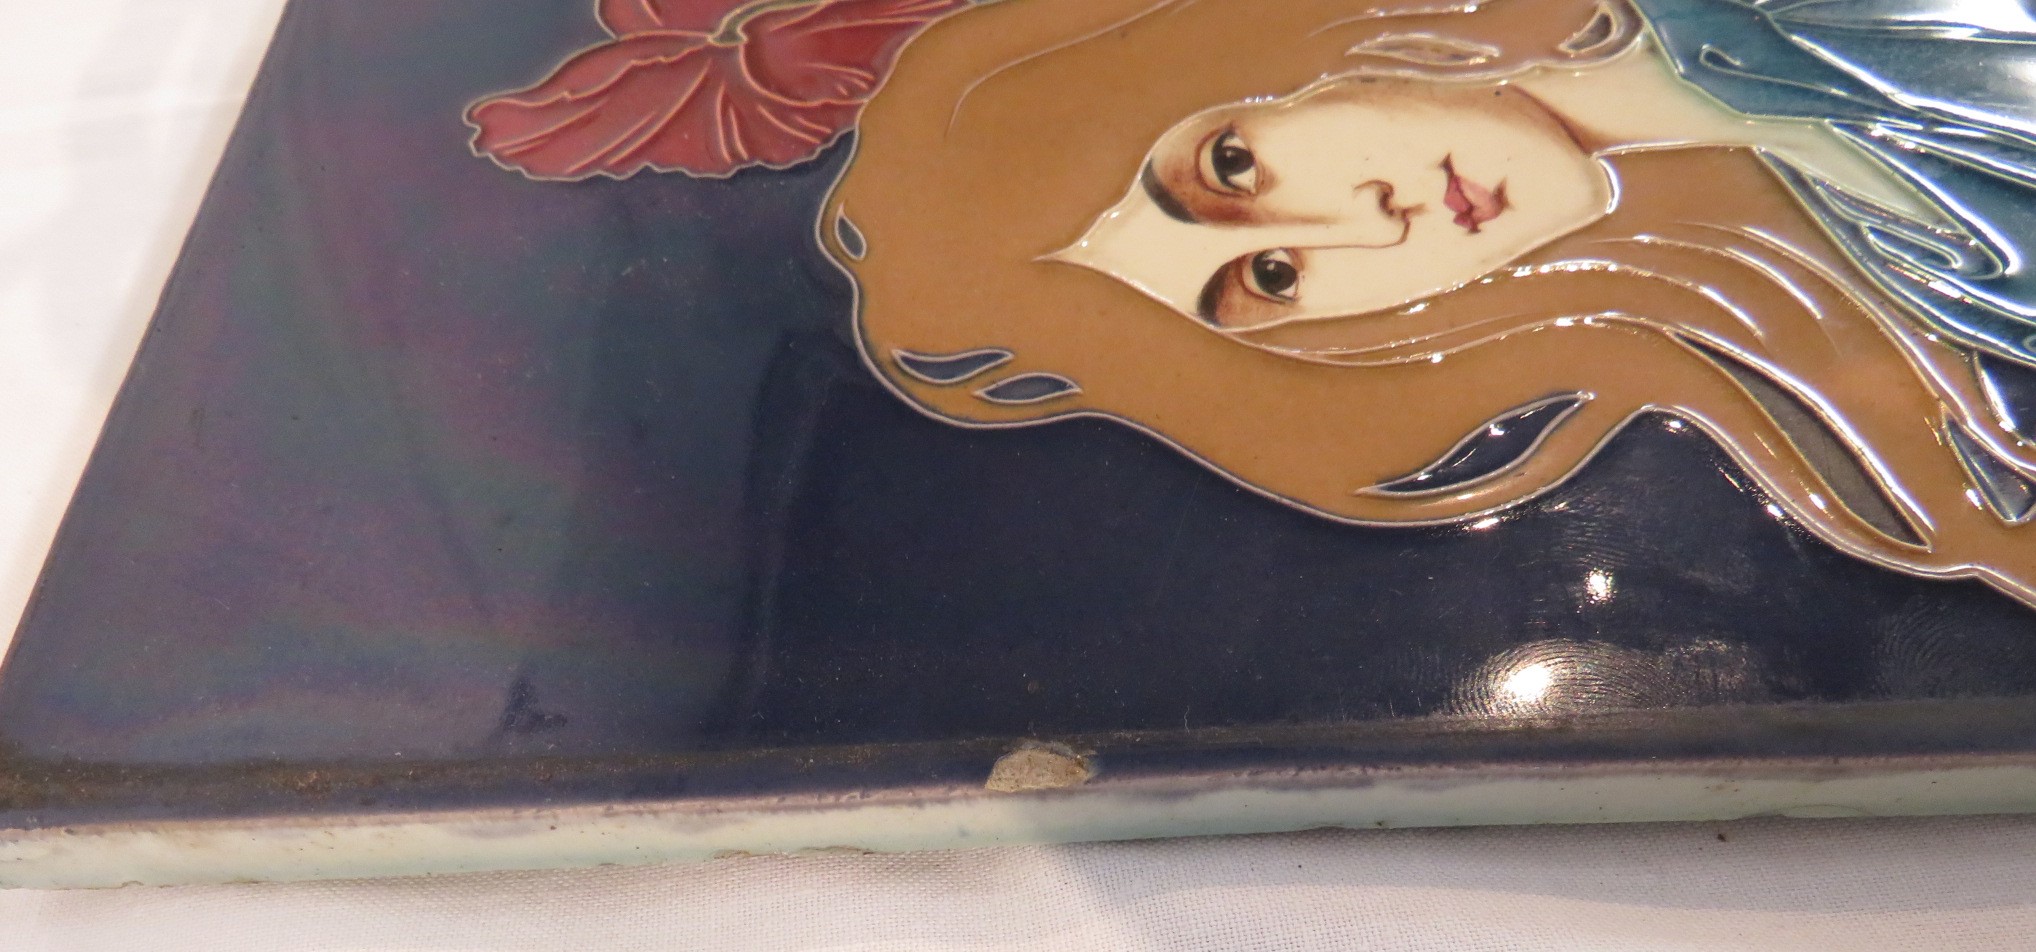 An Art Nouveau ceramic tile by Carl Sigmund Luber, depicting head and shoulders of woman in blue - Image 2 of 14